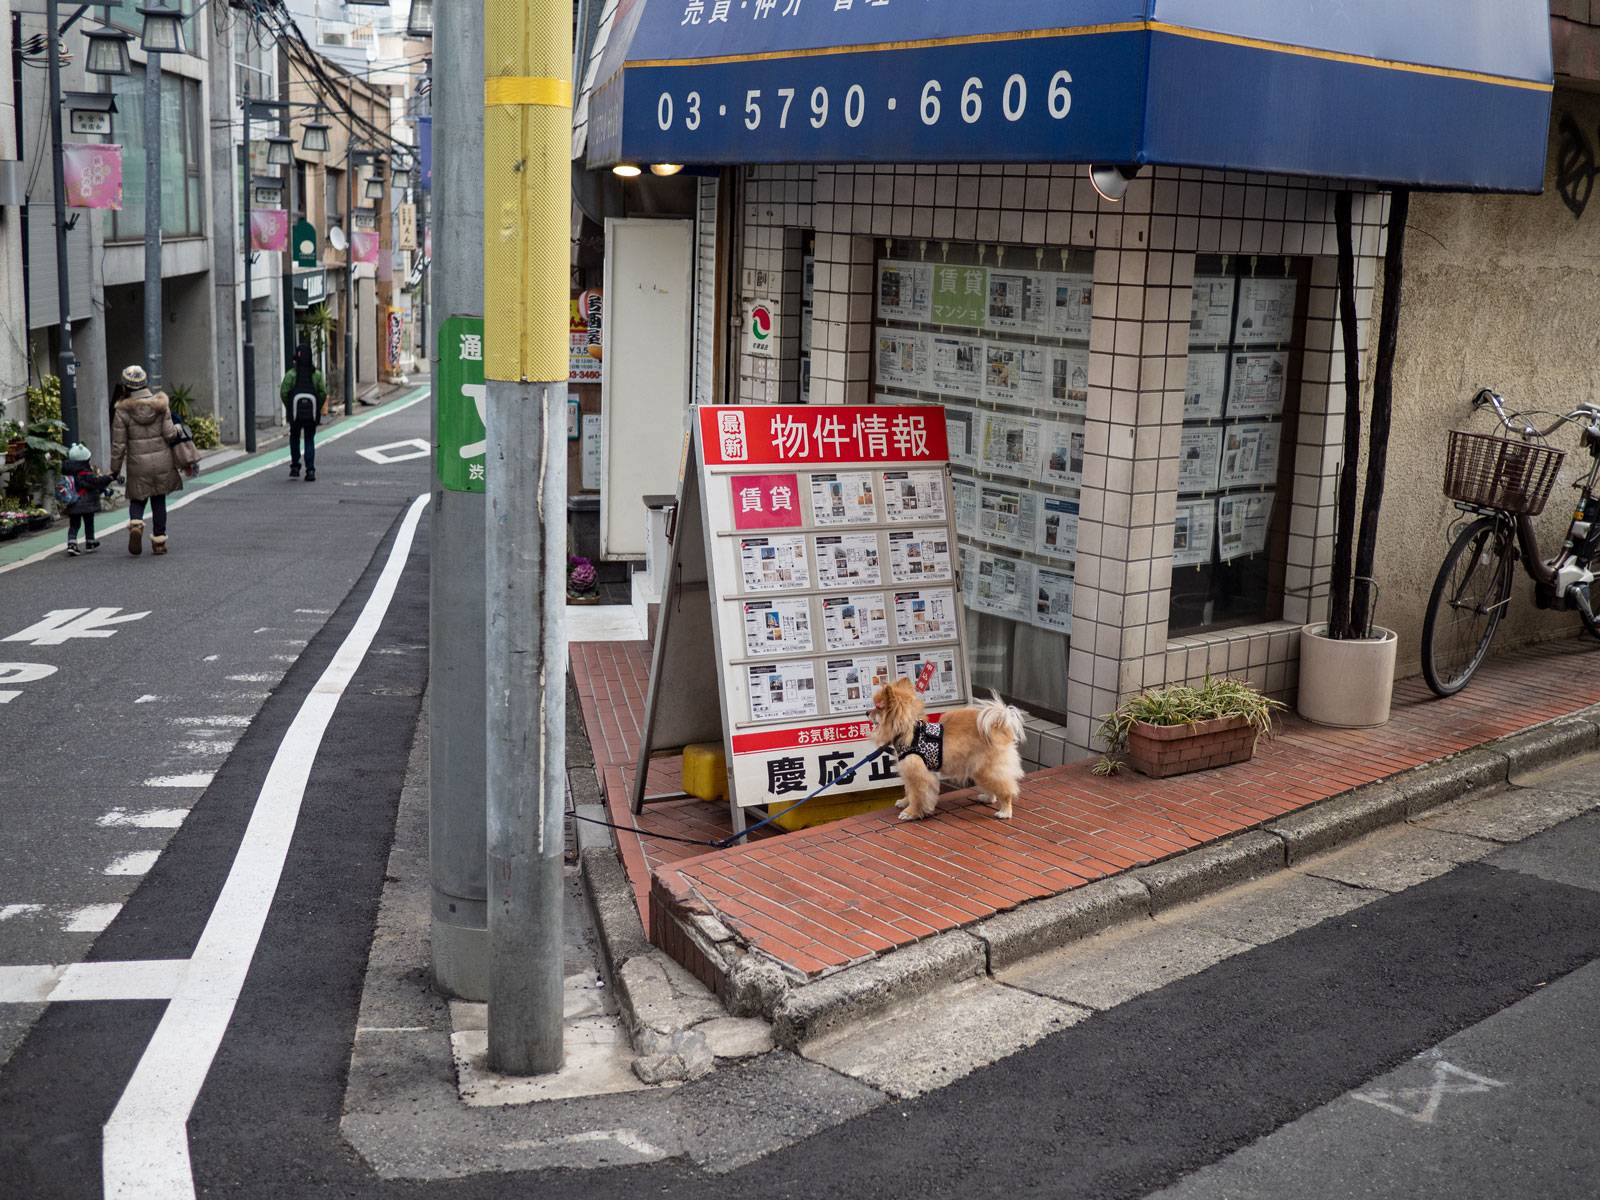 Real estate office with dog out front